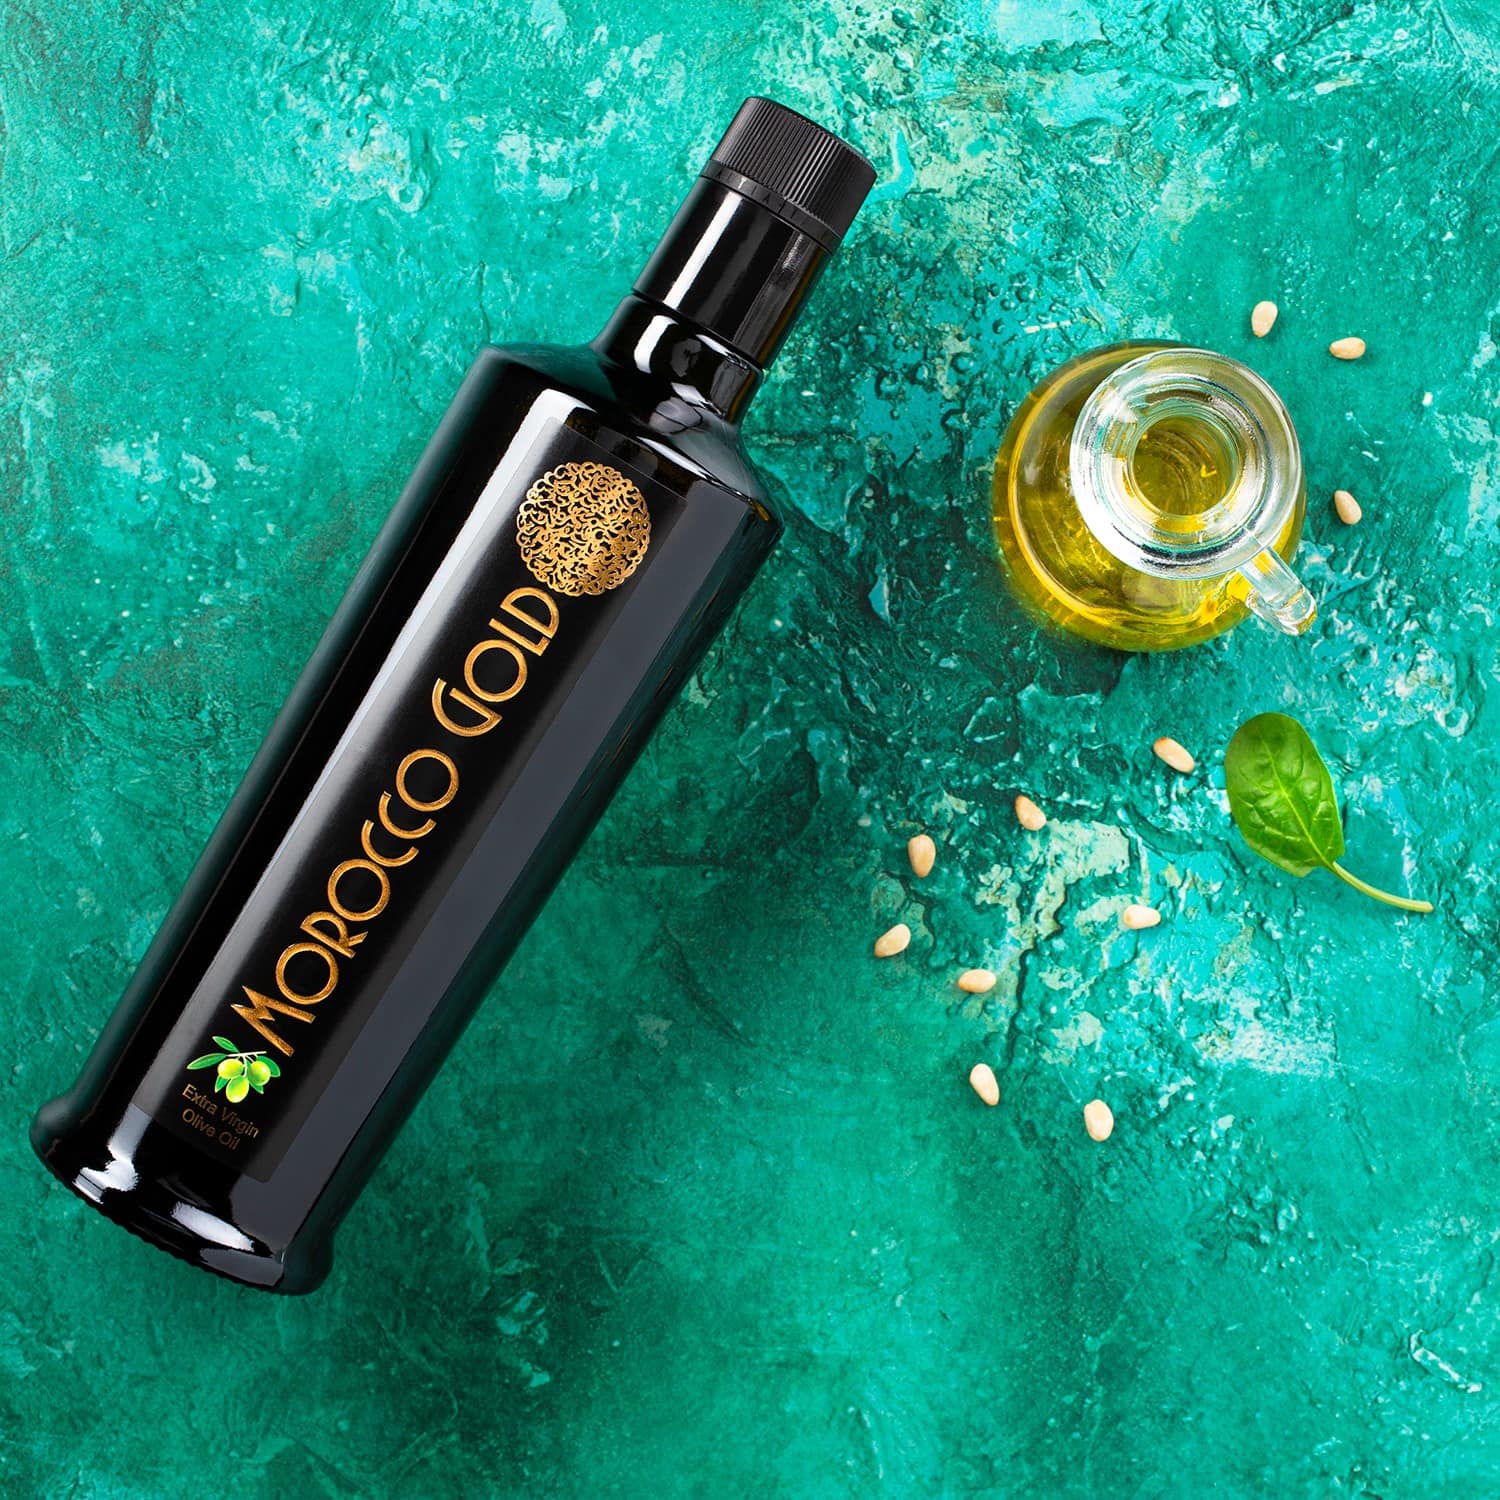 Morocco Gold Extra Virgin Olive Oil - A Distributor Opportunity